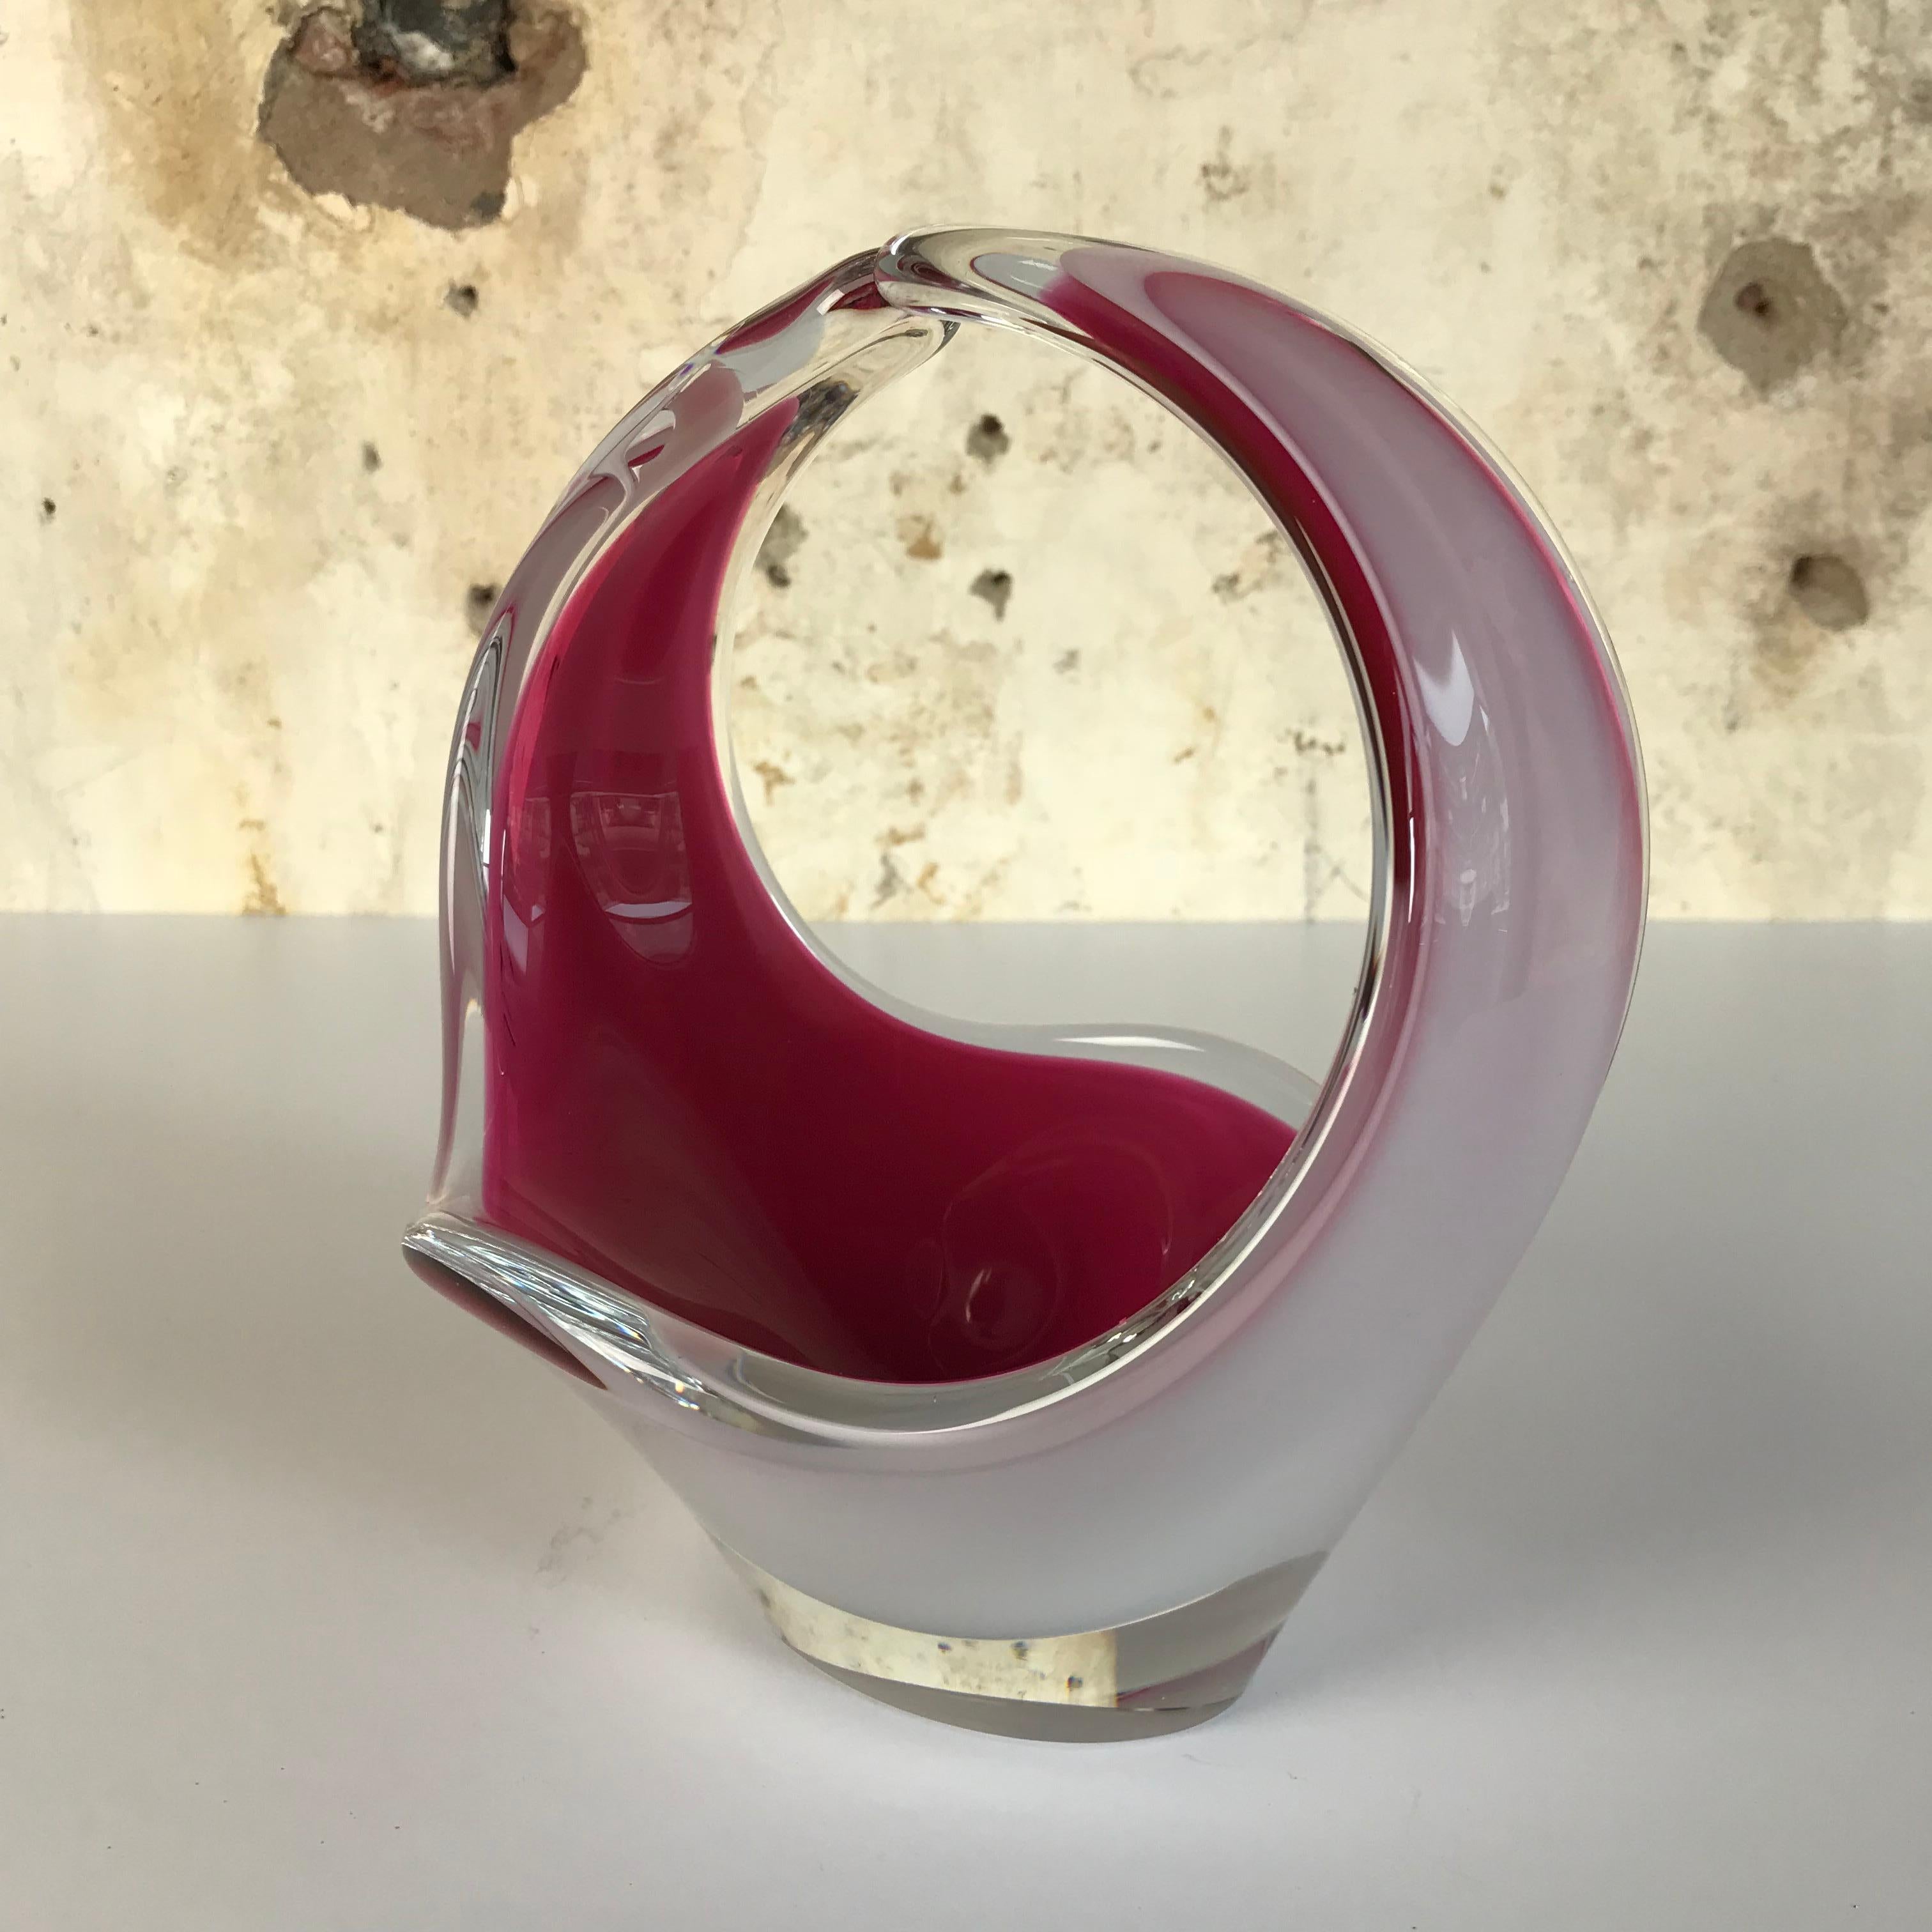 A vintage Mid-Century Modern Swedish glass free-form bowl by Flygsfors, designed by Paul Kedelv for his organic Coquille range.
Signed Coquille & Flygsfors - '61.
The free-form sculpture bowl is of oval form with folded ends and consists of pink